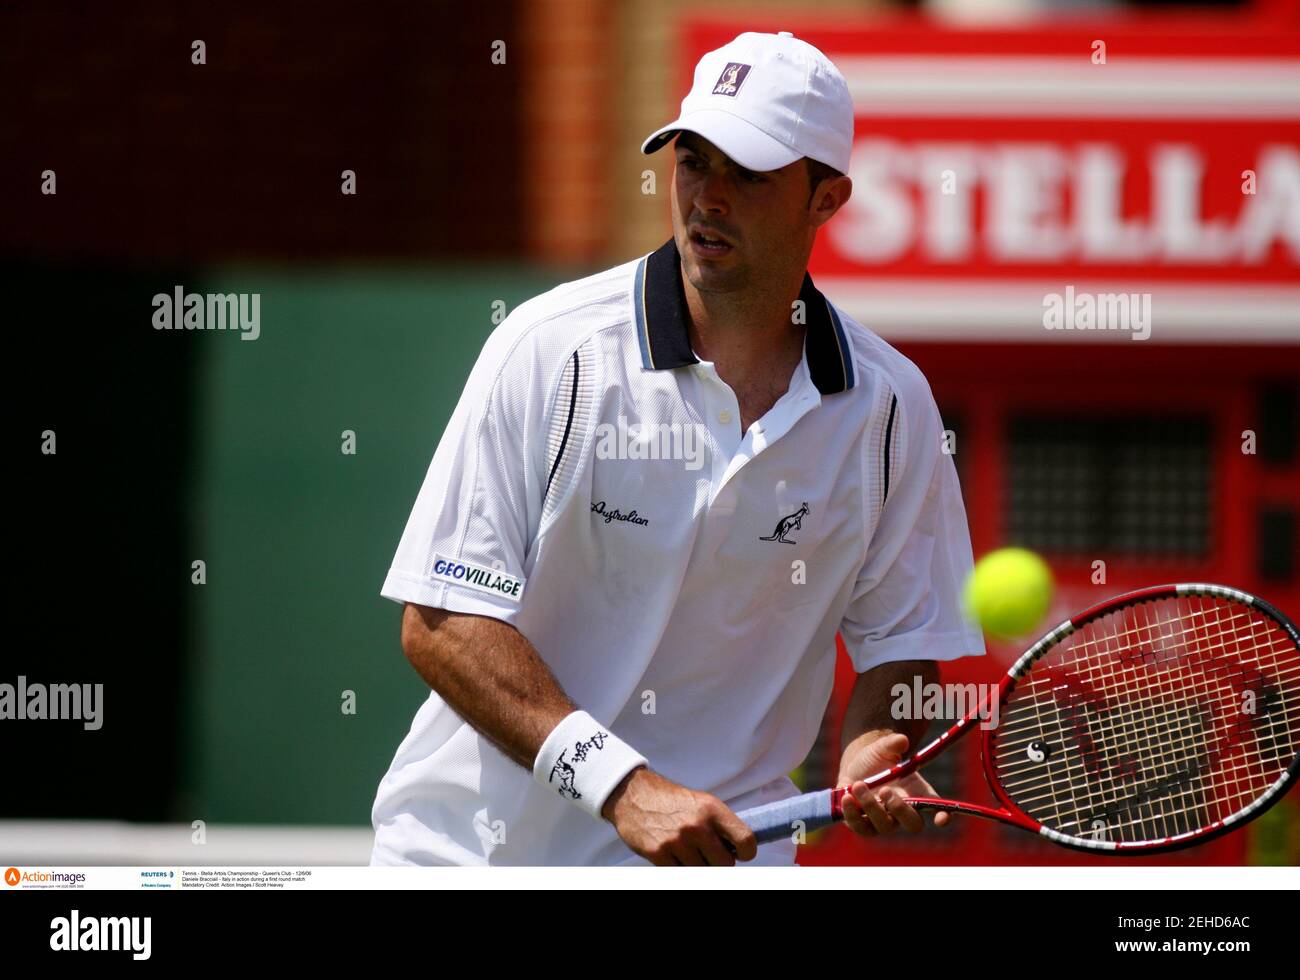 Tennis - Stella Artois Championship - Queen's Club - 12/6/06 Daniele  Bracciali - Italy in action during a first round match Mandatory Credit:  Action Images / Scott Heavey Stock Photo - Alamy